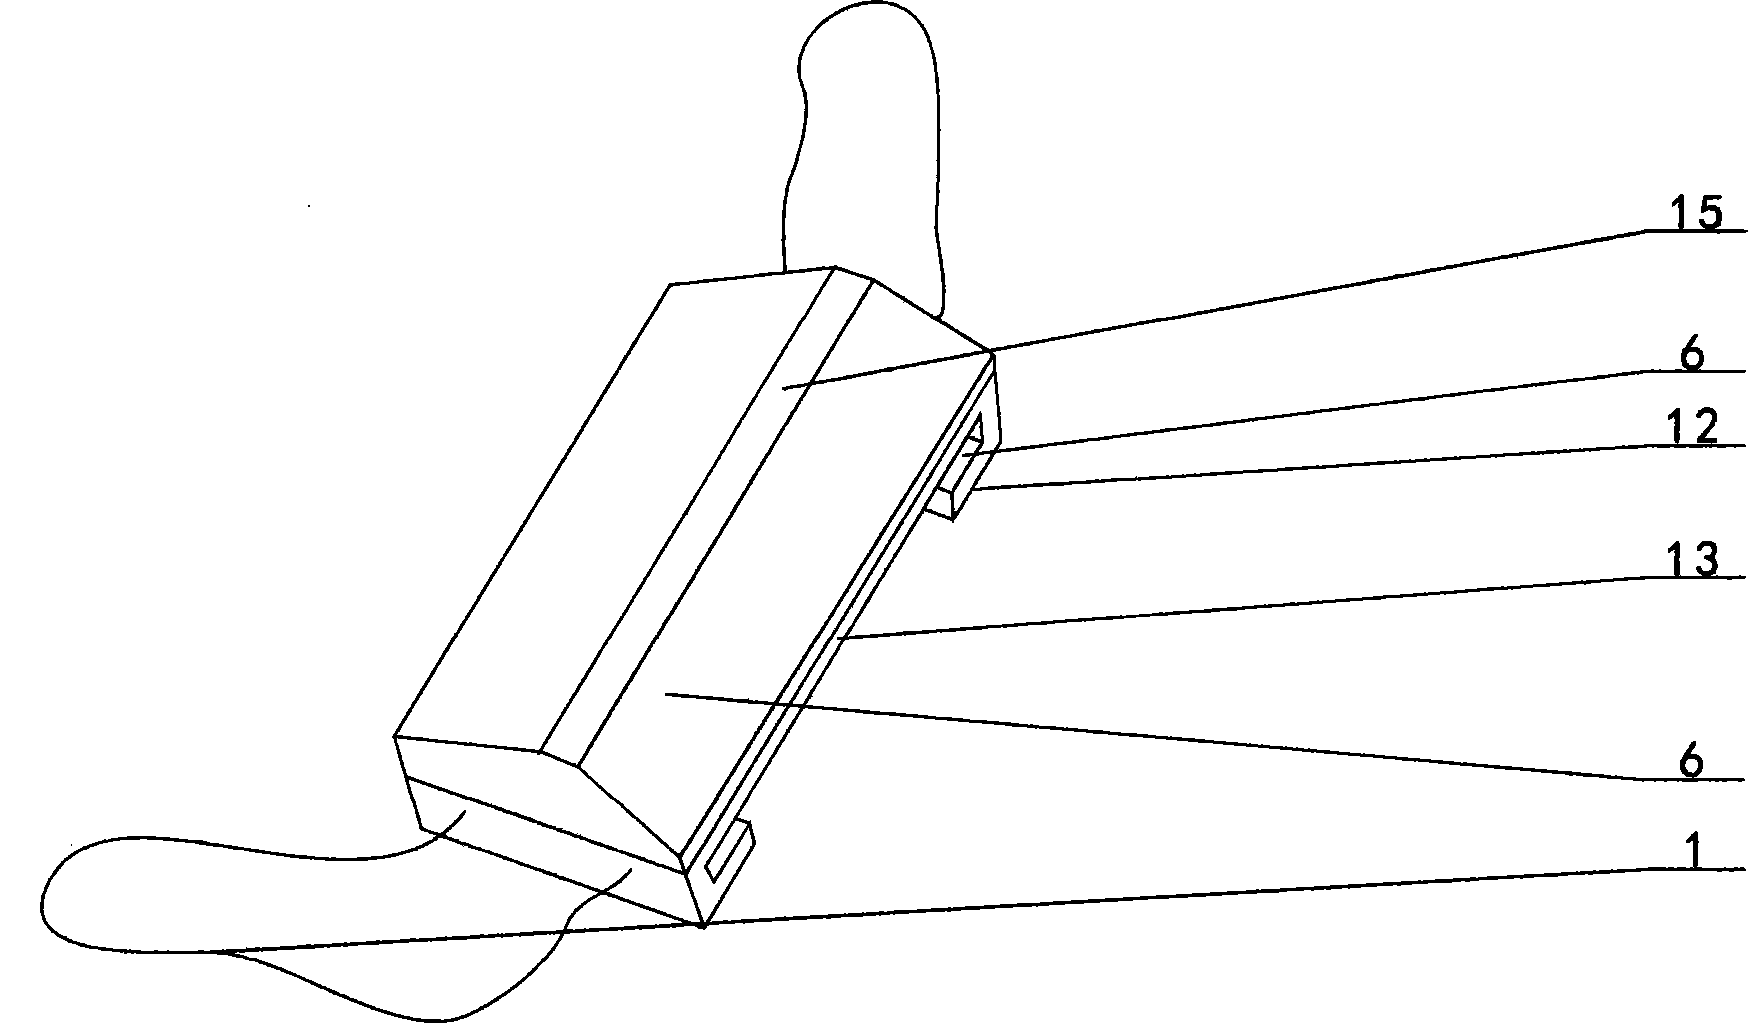 Secondary injury prevention device for emergency treatment of bone fracture patients